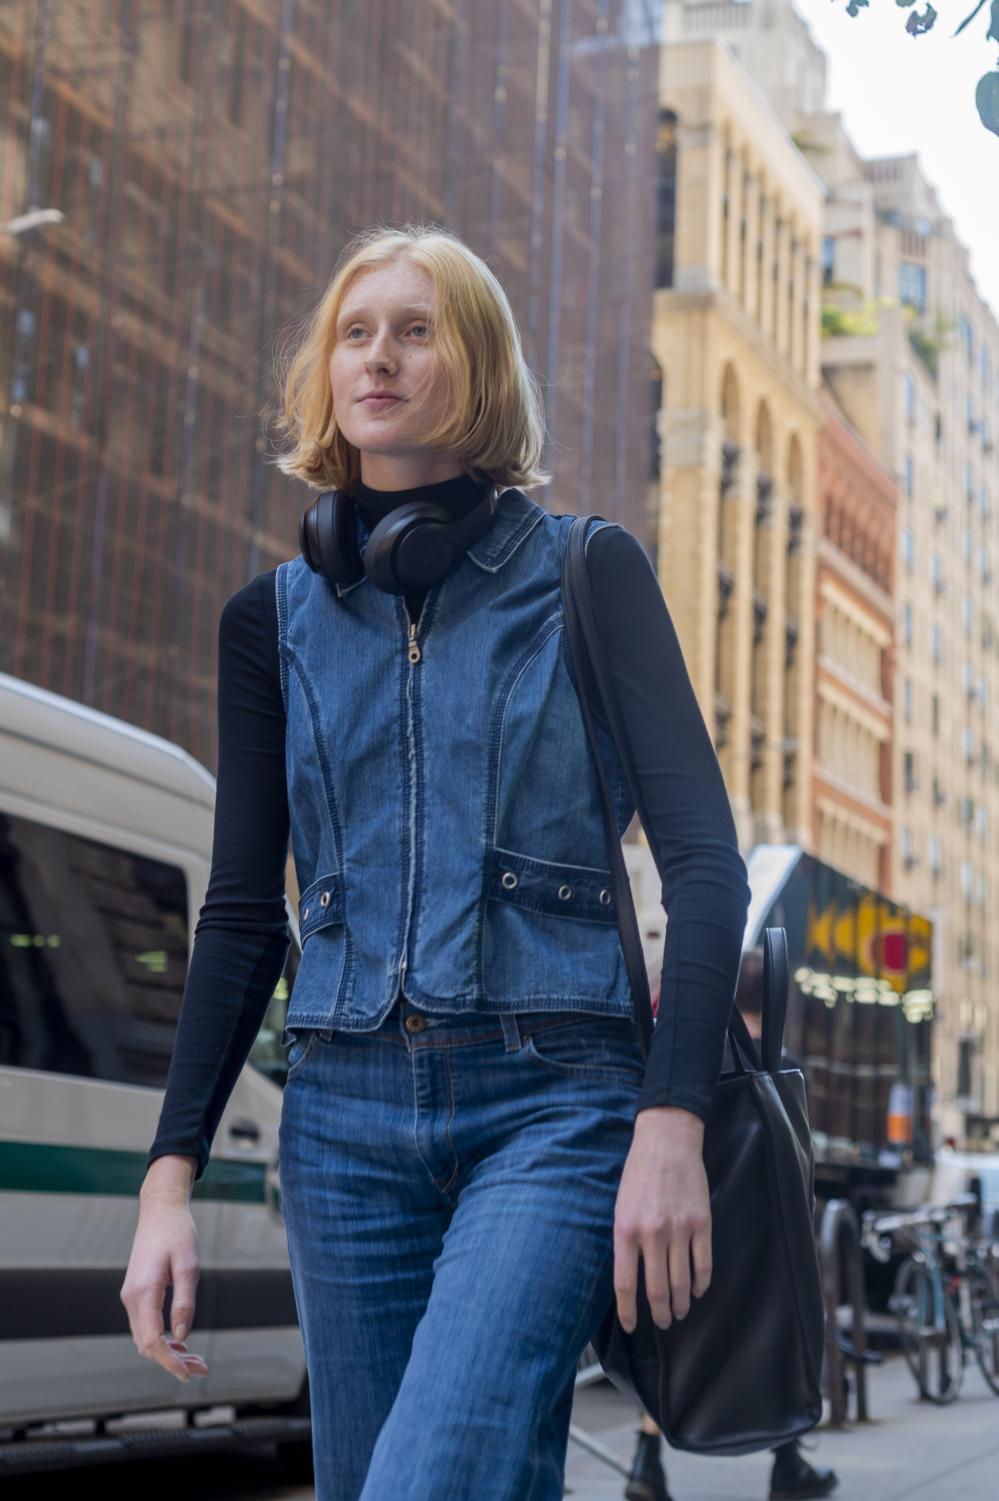 Hannah Wheless is walking down the street wearing blue denim pants and a zip-up denim vest over a black long-sleeve shirt.